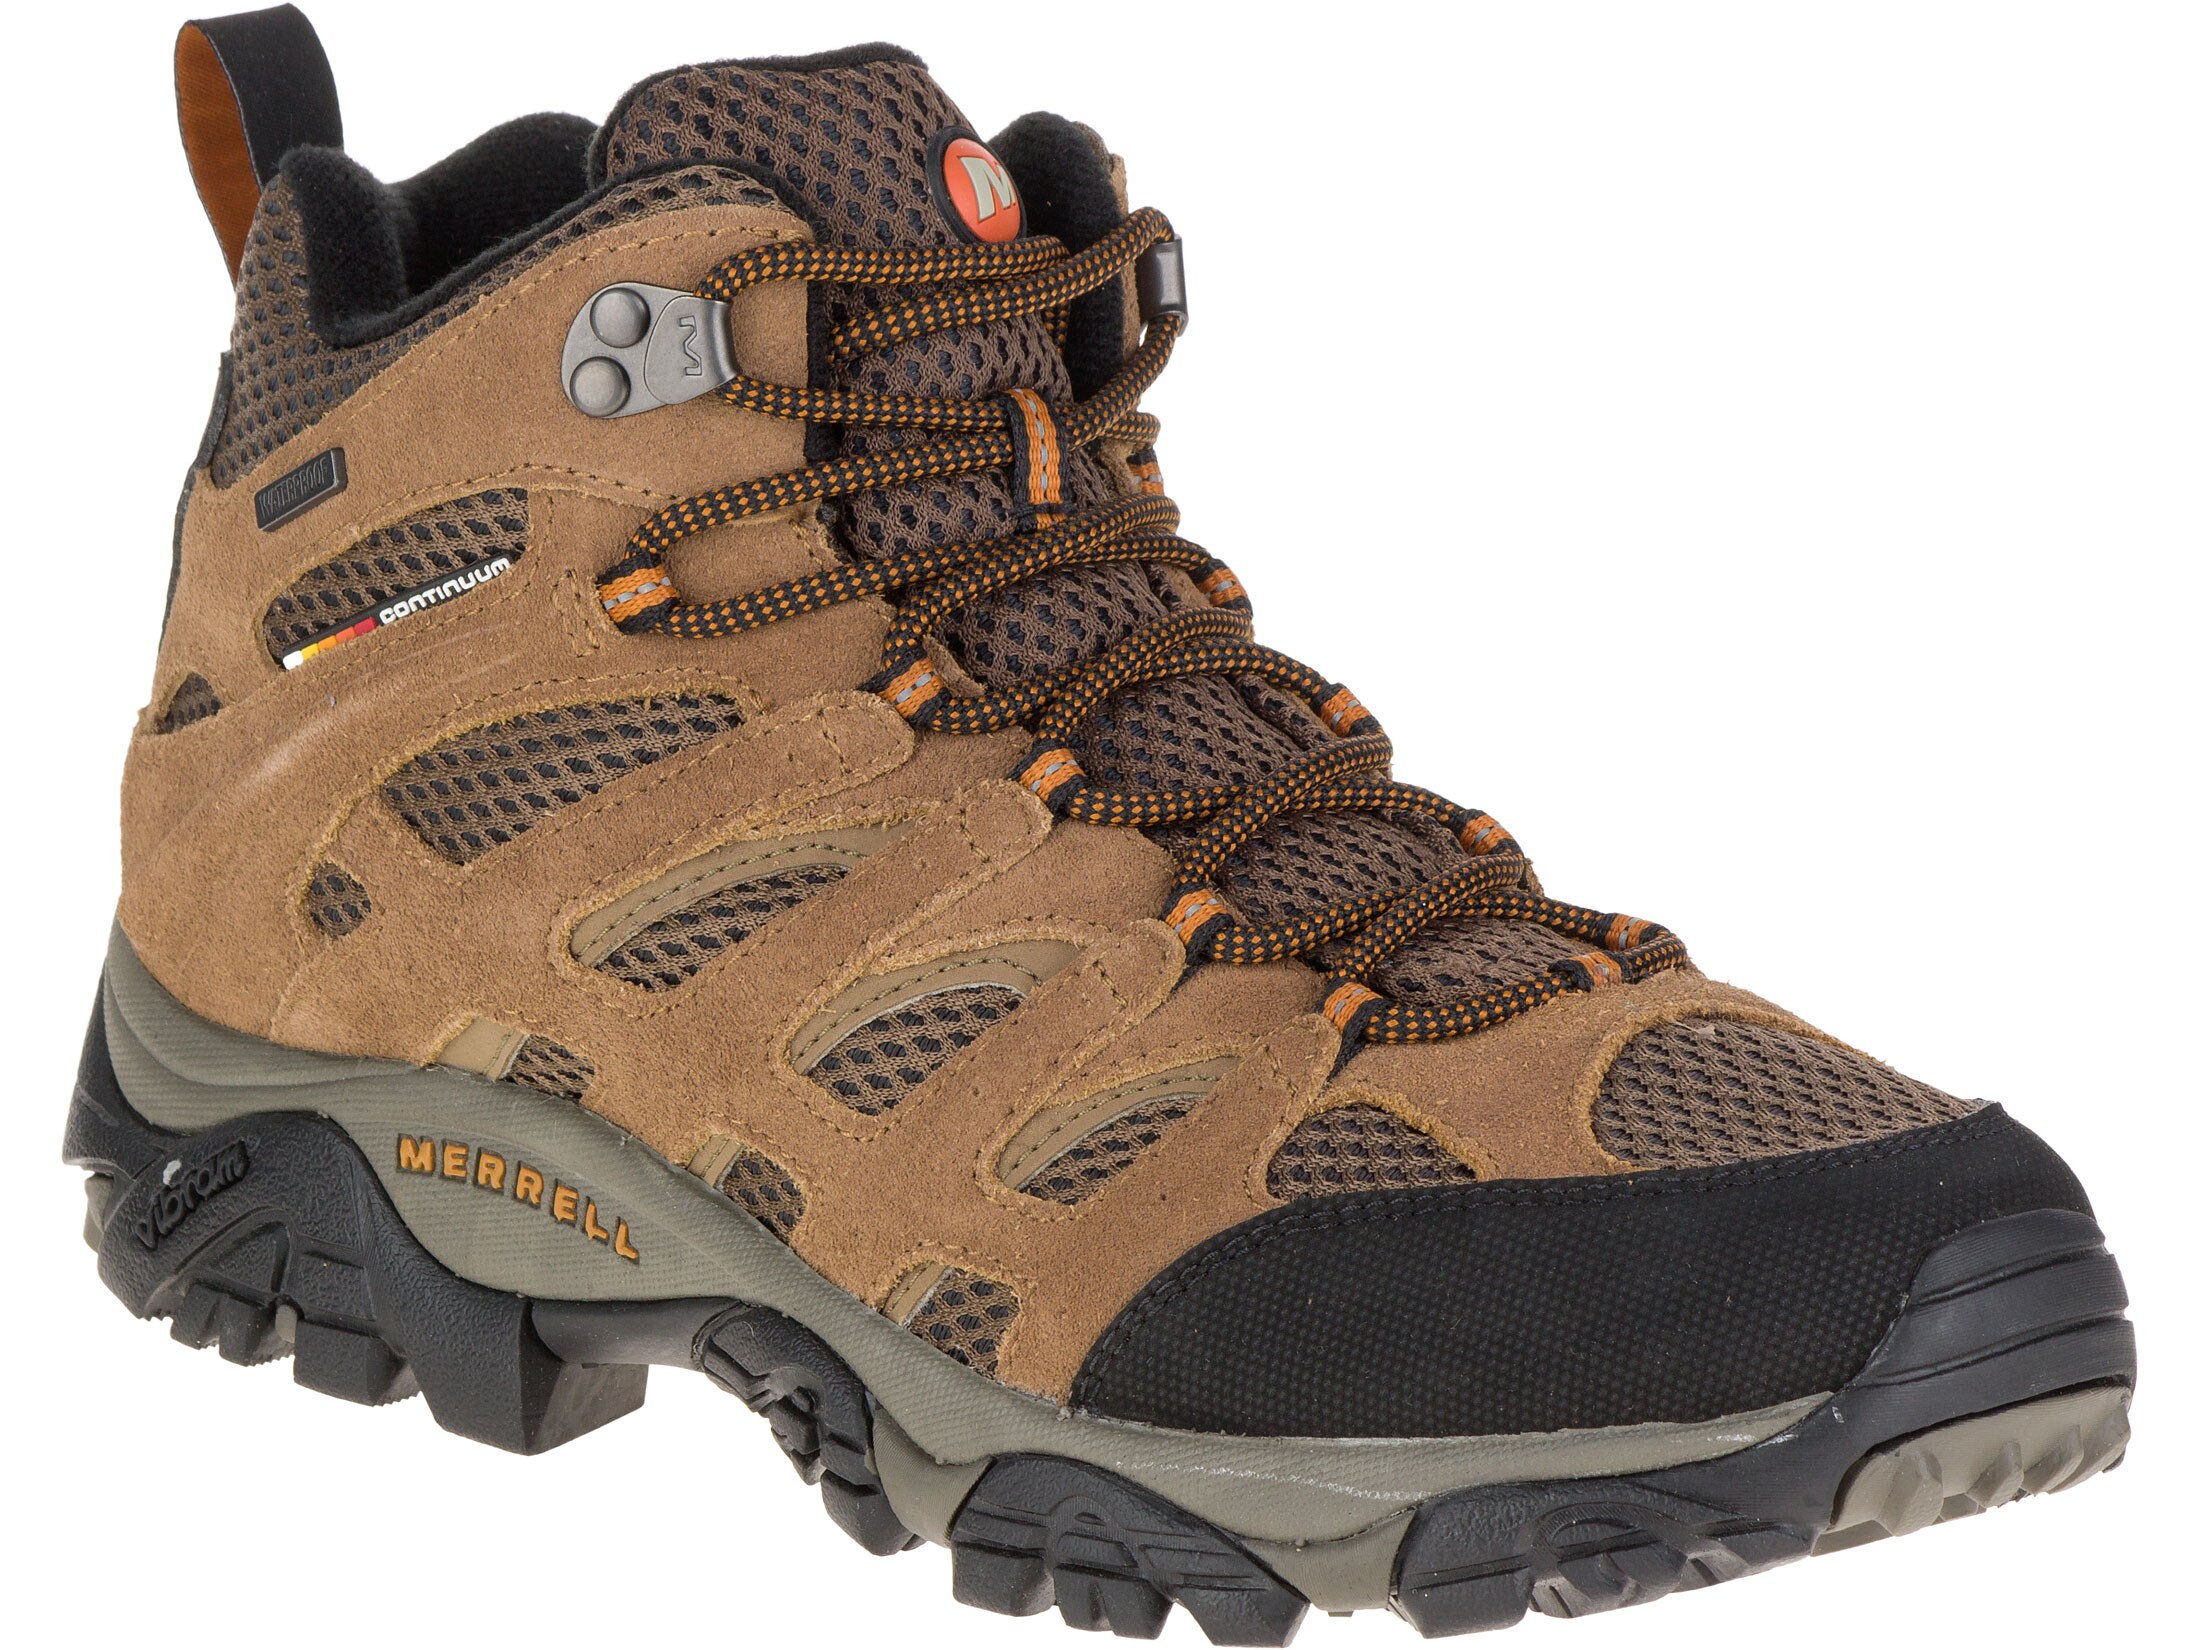 Merrell Moab Mid 5 Waterproof Hiking Boots Leather Suede Earth Men's 8